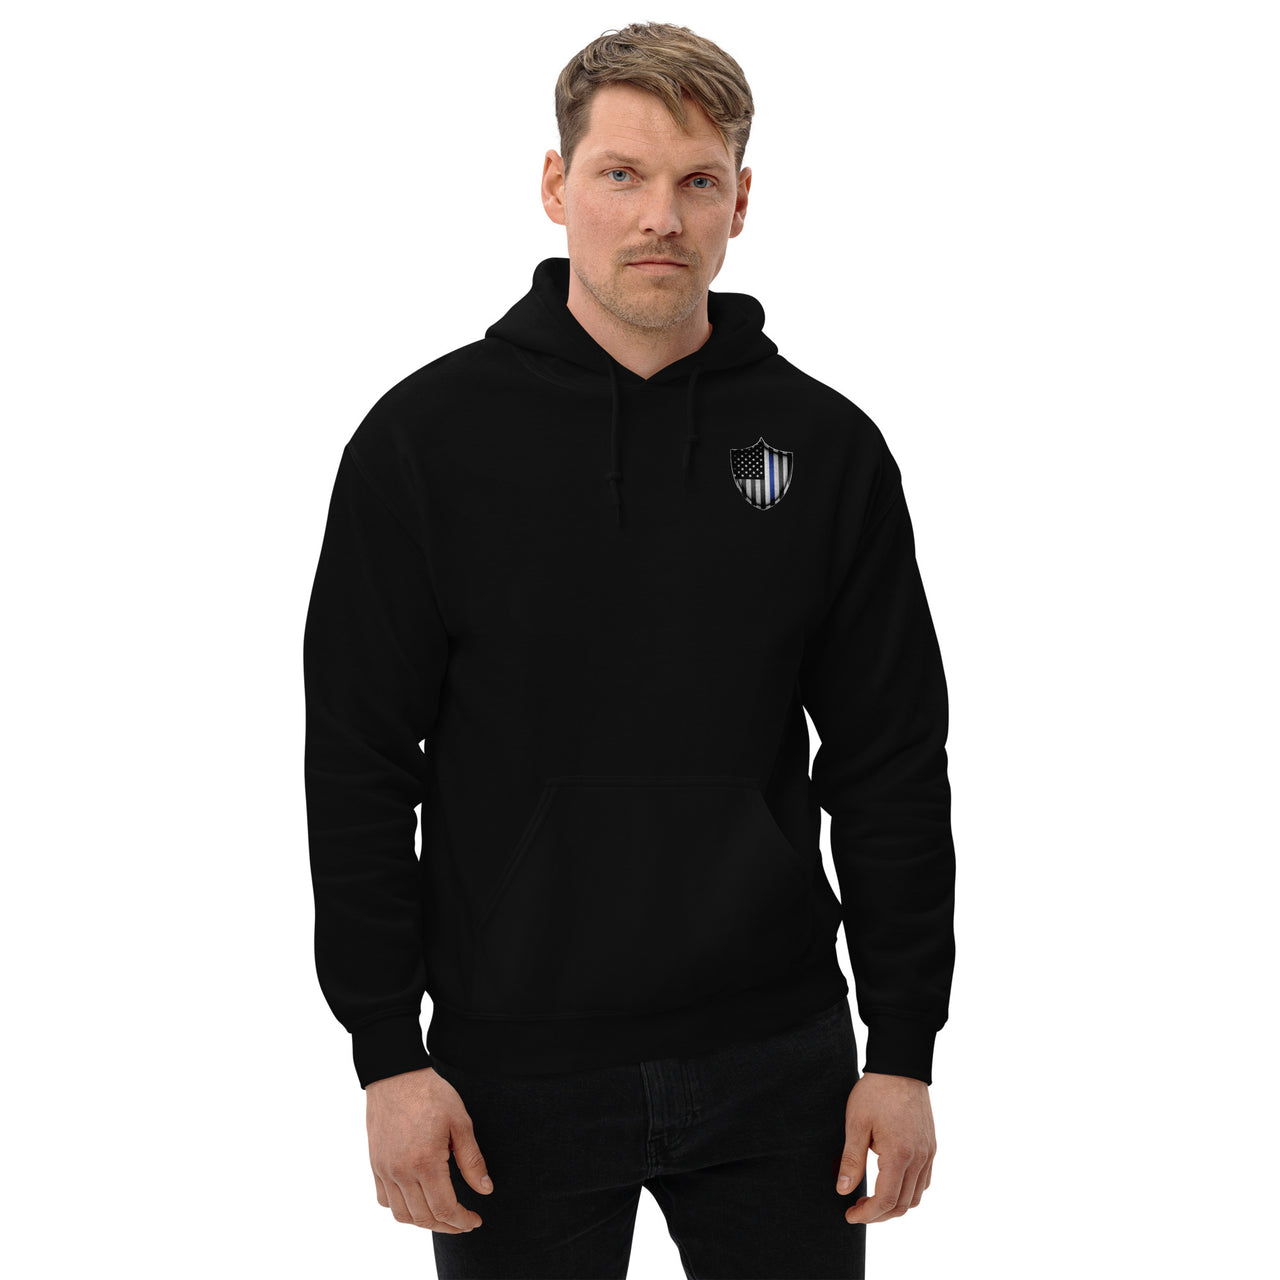 Police Thin Blue Line Hoodie modeled in black front